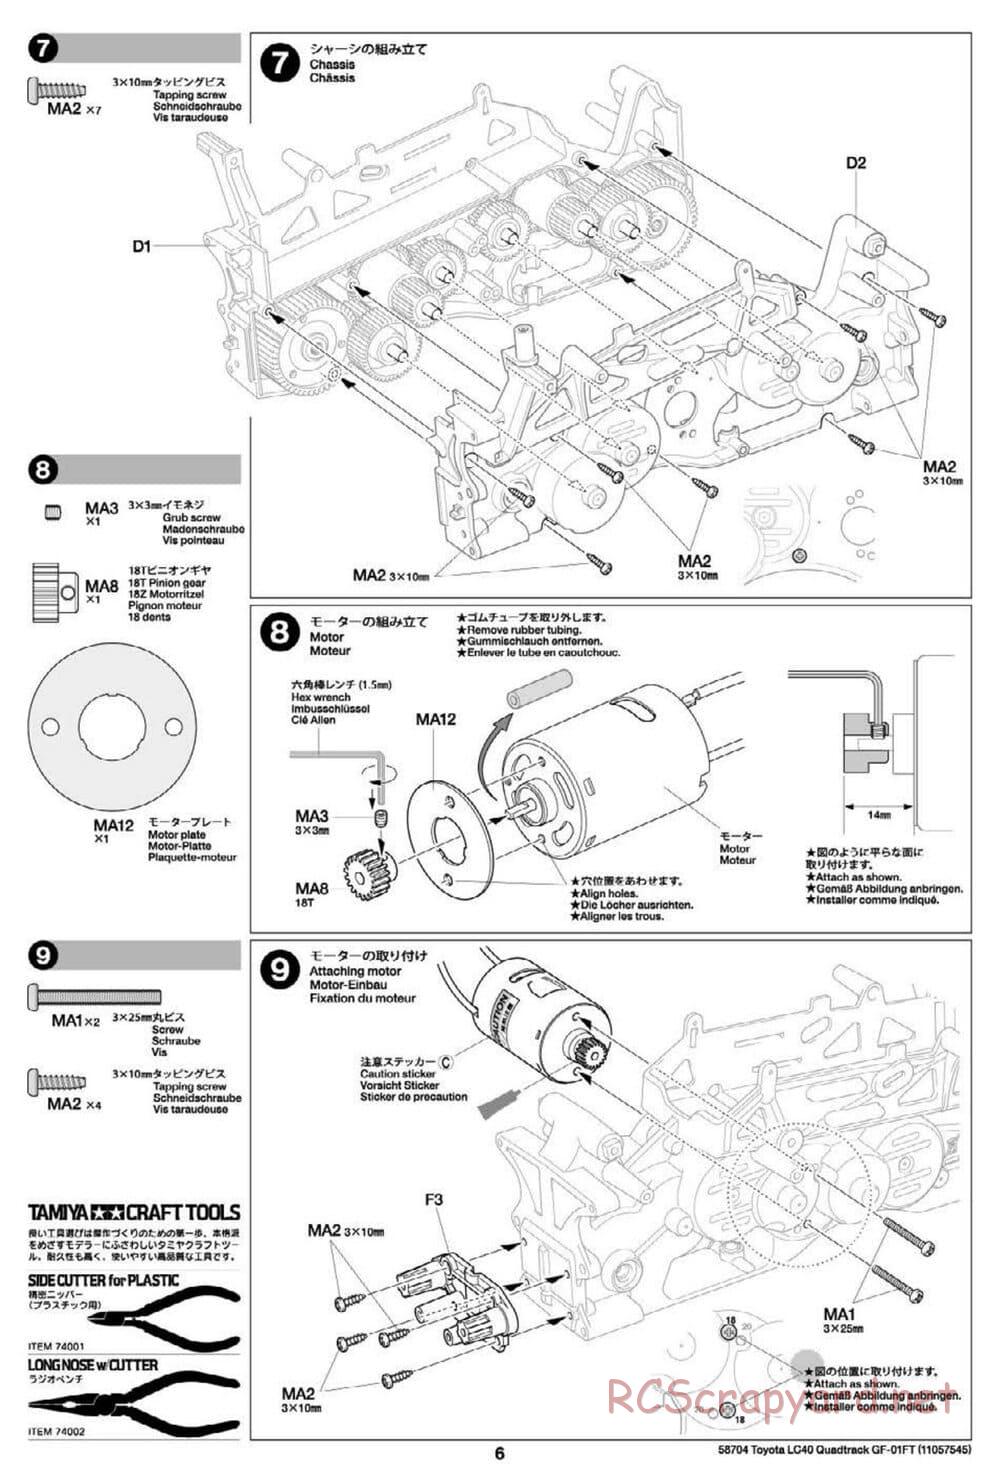 Tamiya - Toyota Land Cruiser 40 Pick-Up Quadtrack - GF-01FT Chassis - Manual - Page 6